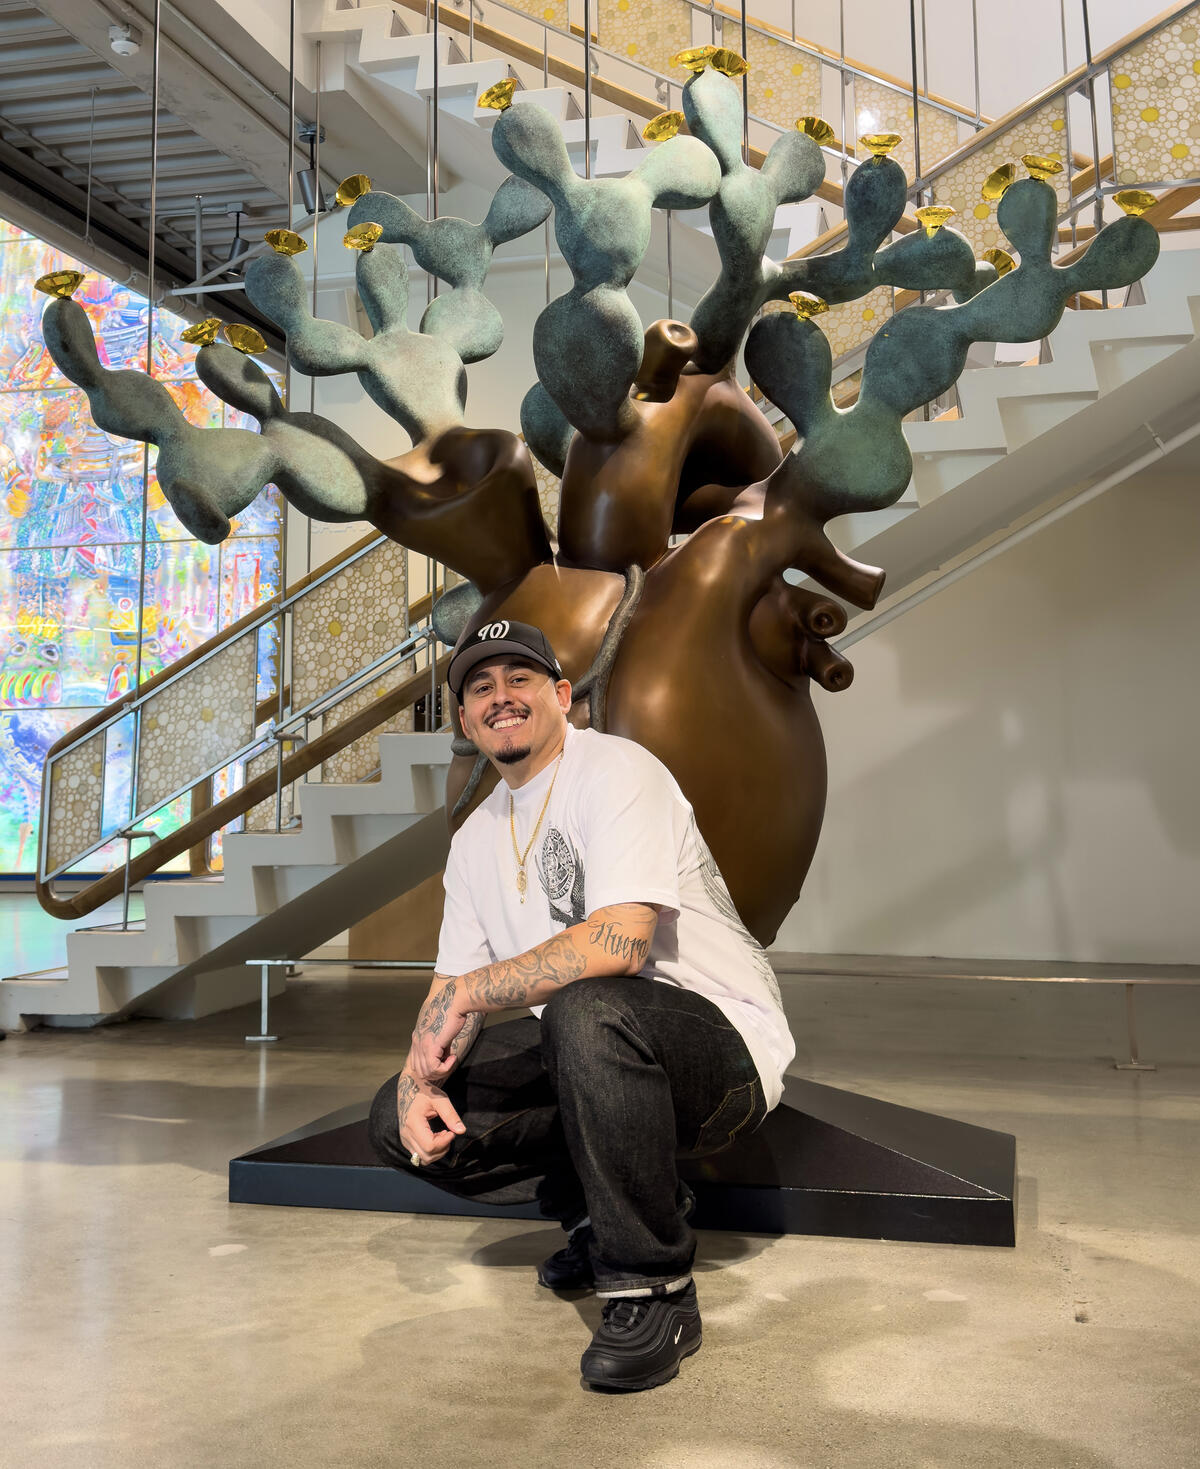 Photo of Michael Cerda-Jara in front of a sculpture